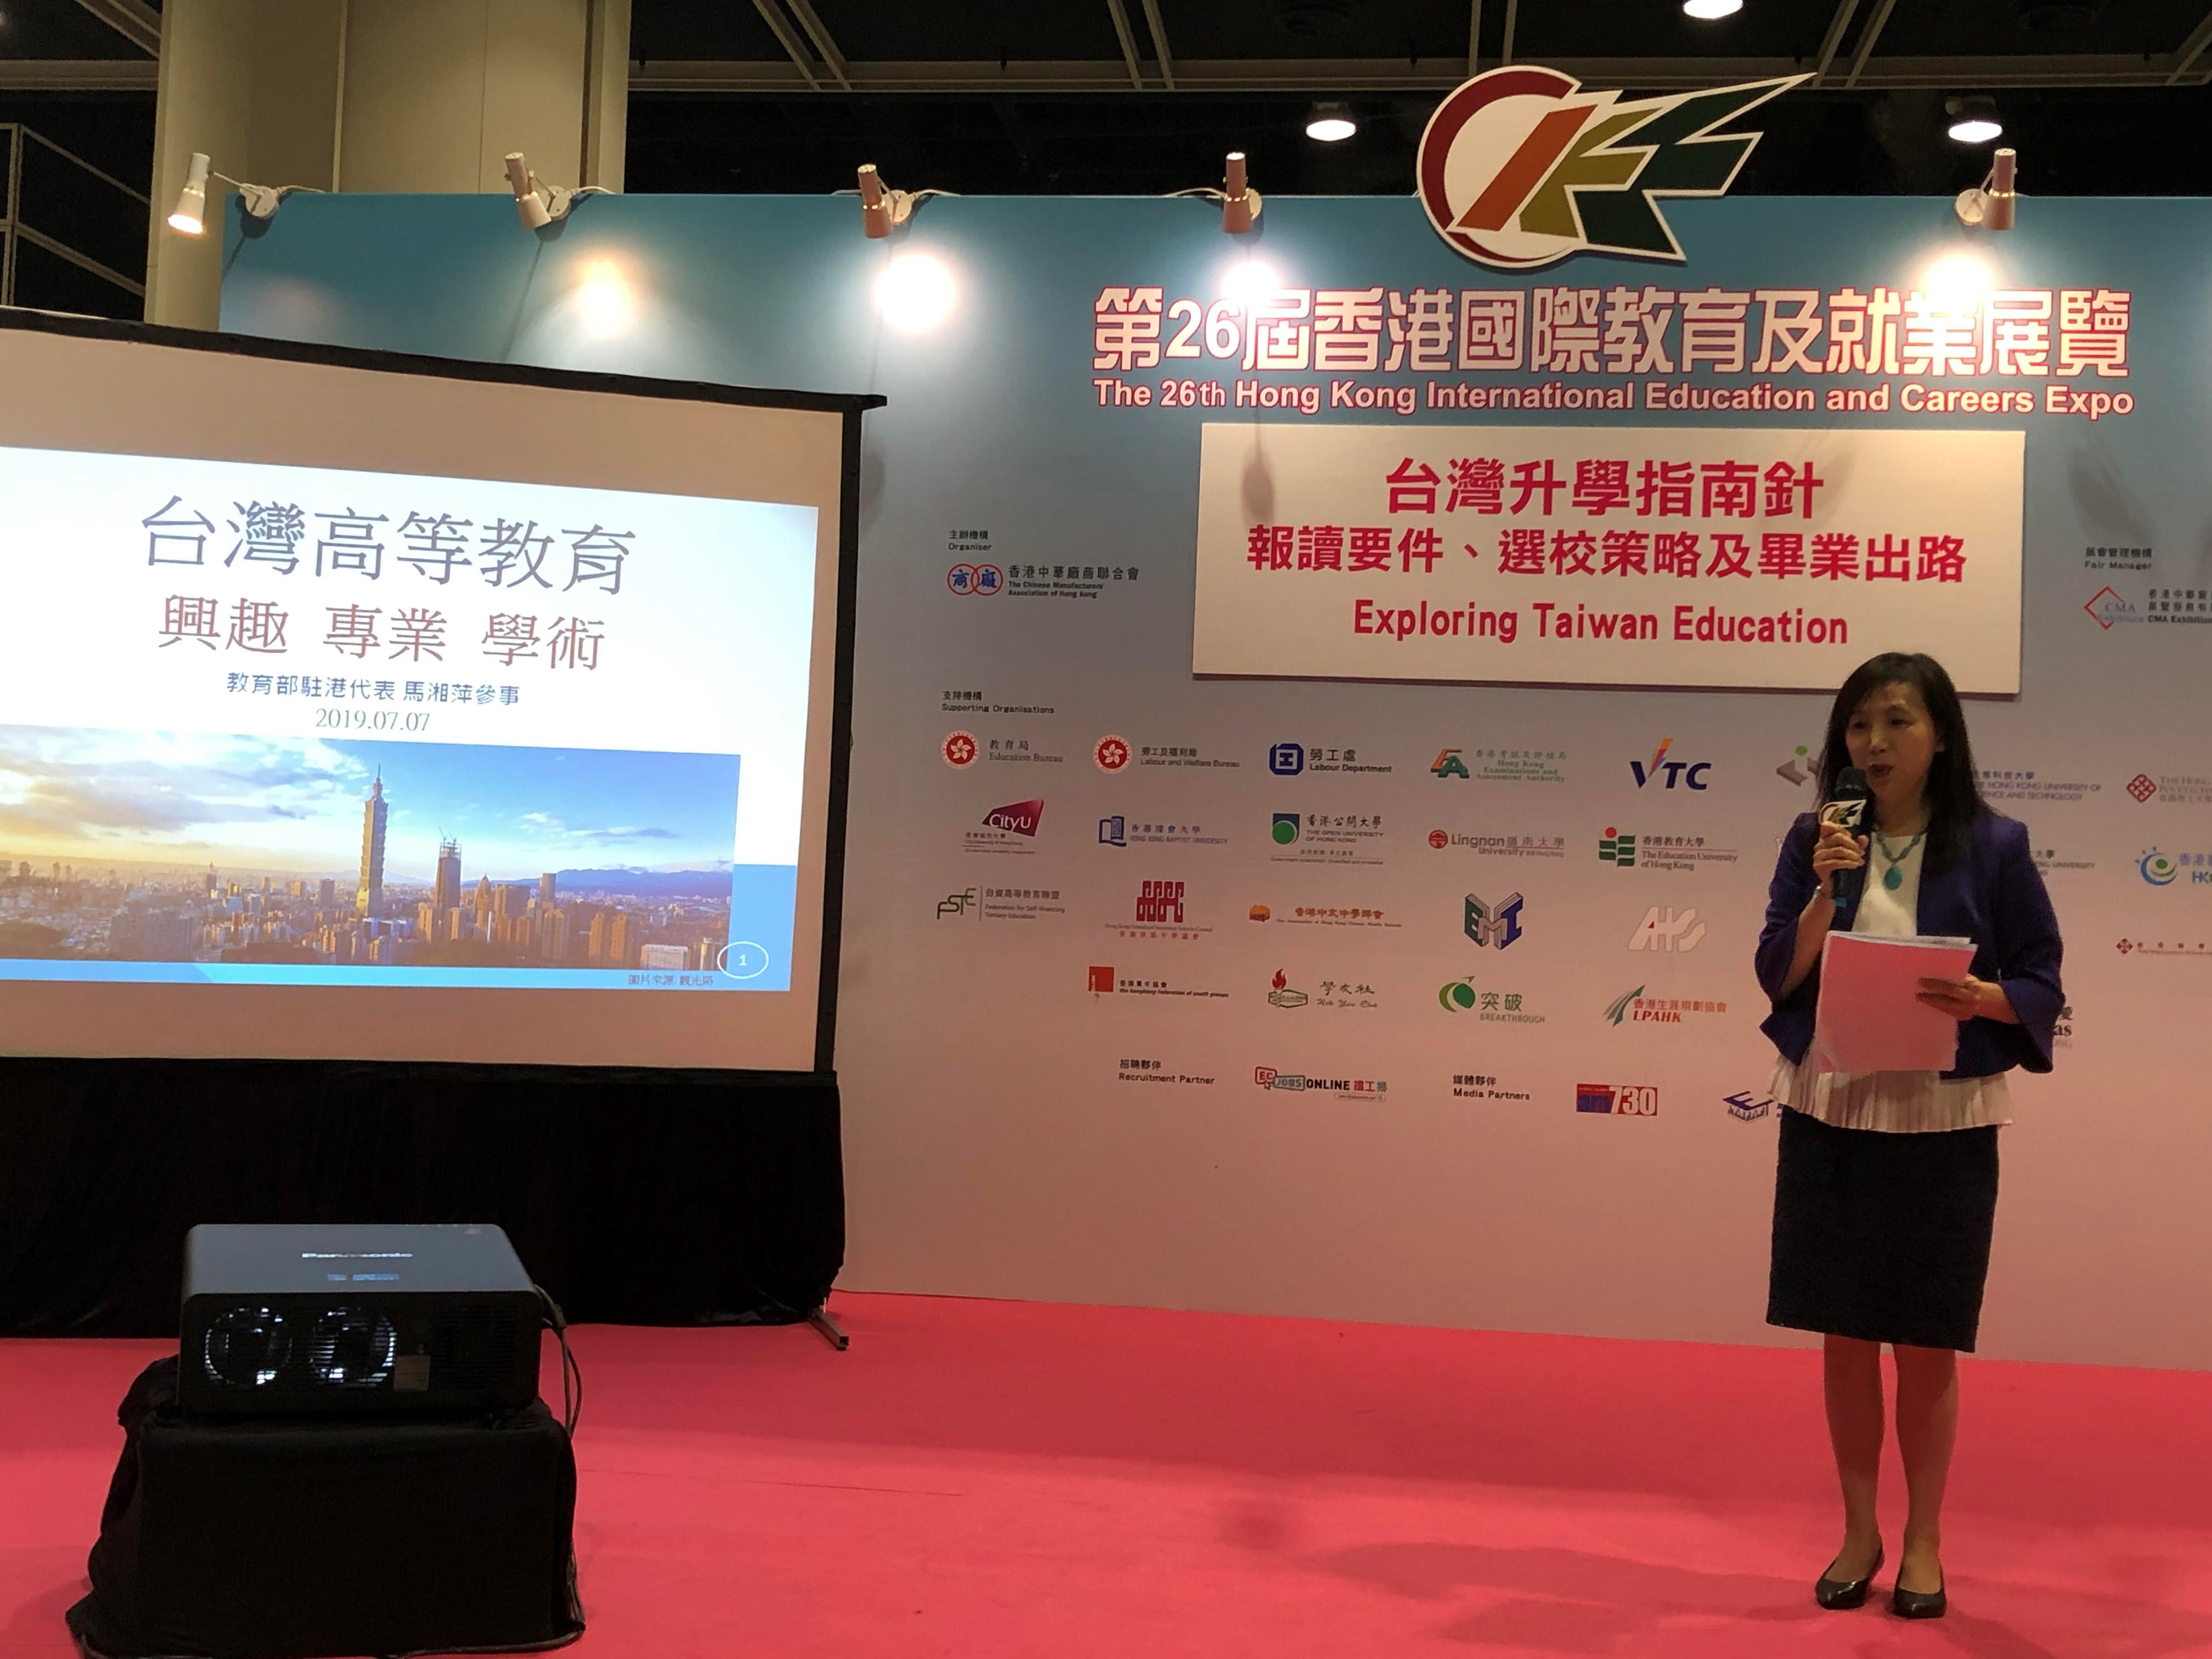 Sophia Hsiang Ping Ma attends the 26th Hong Kong International Education and Careers Expo and hosts a presentation on Studying in Taiwan